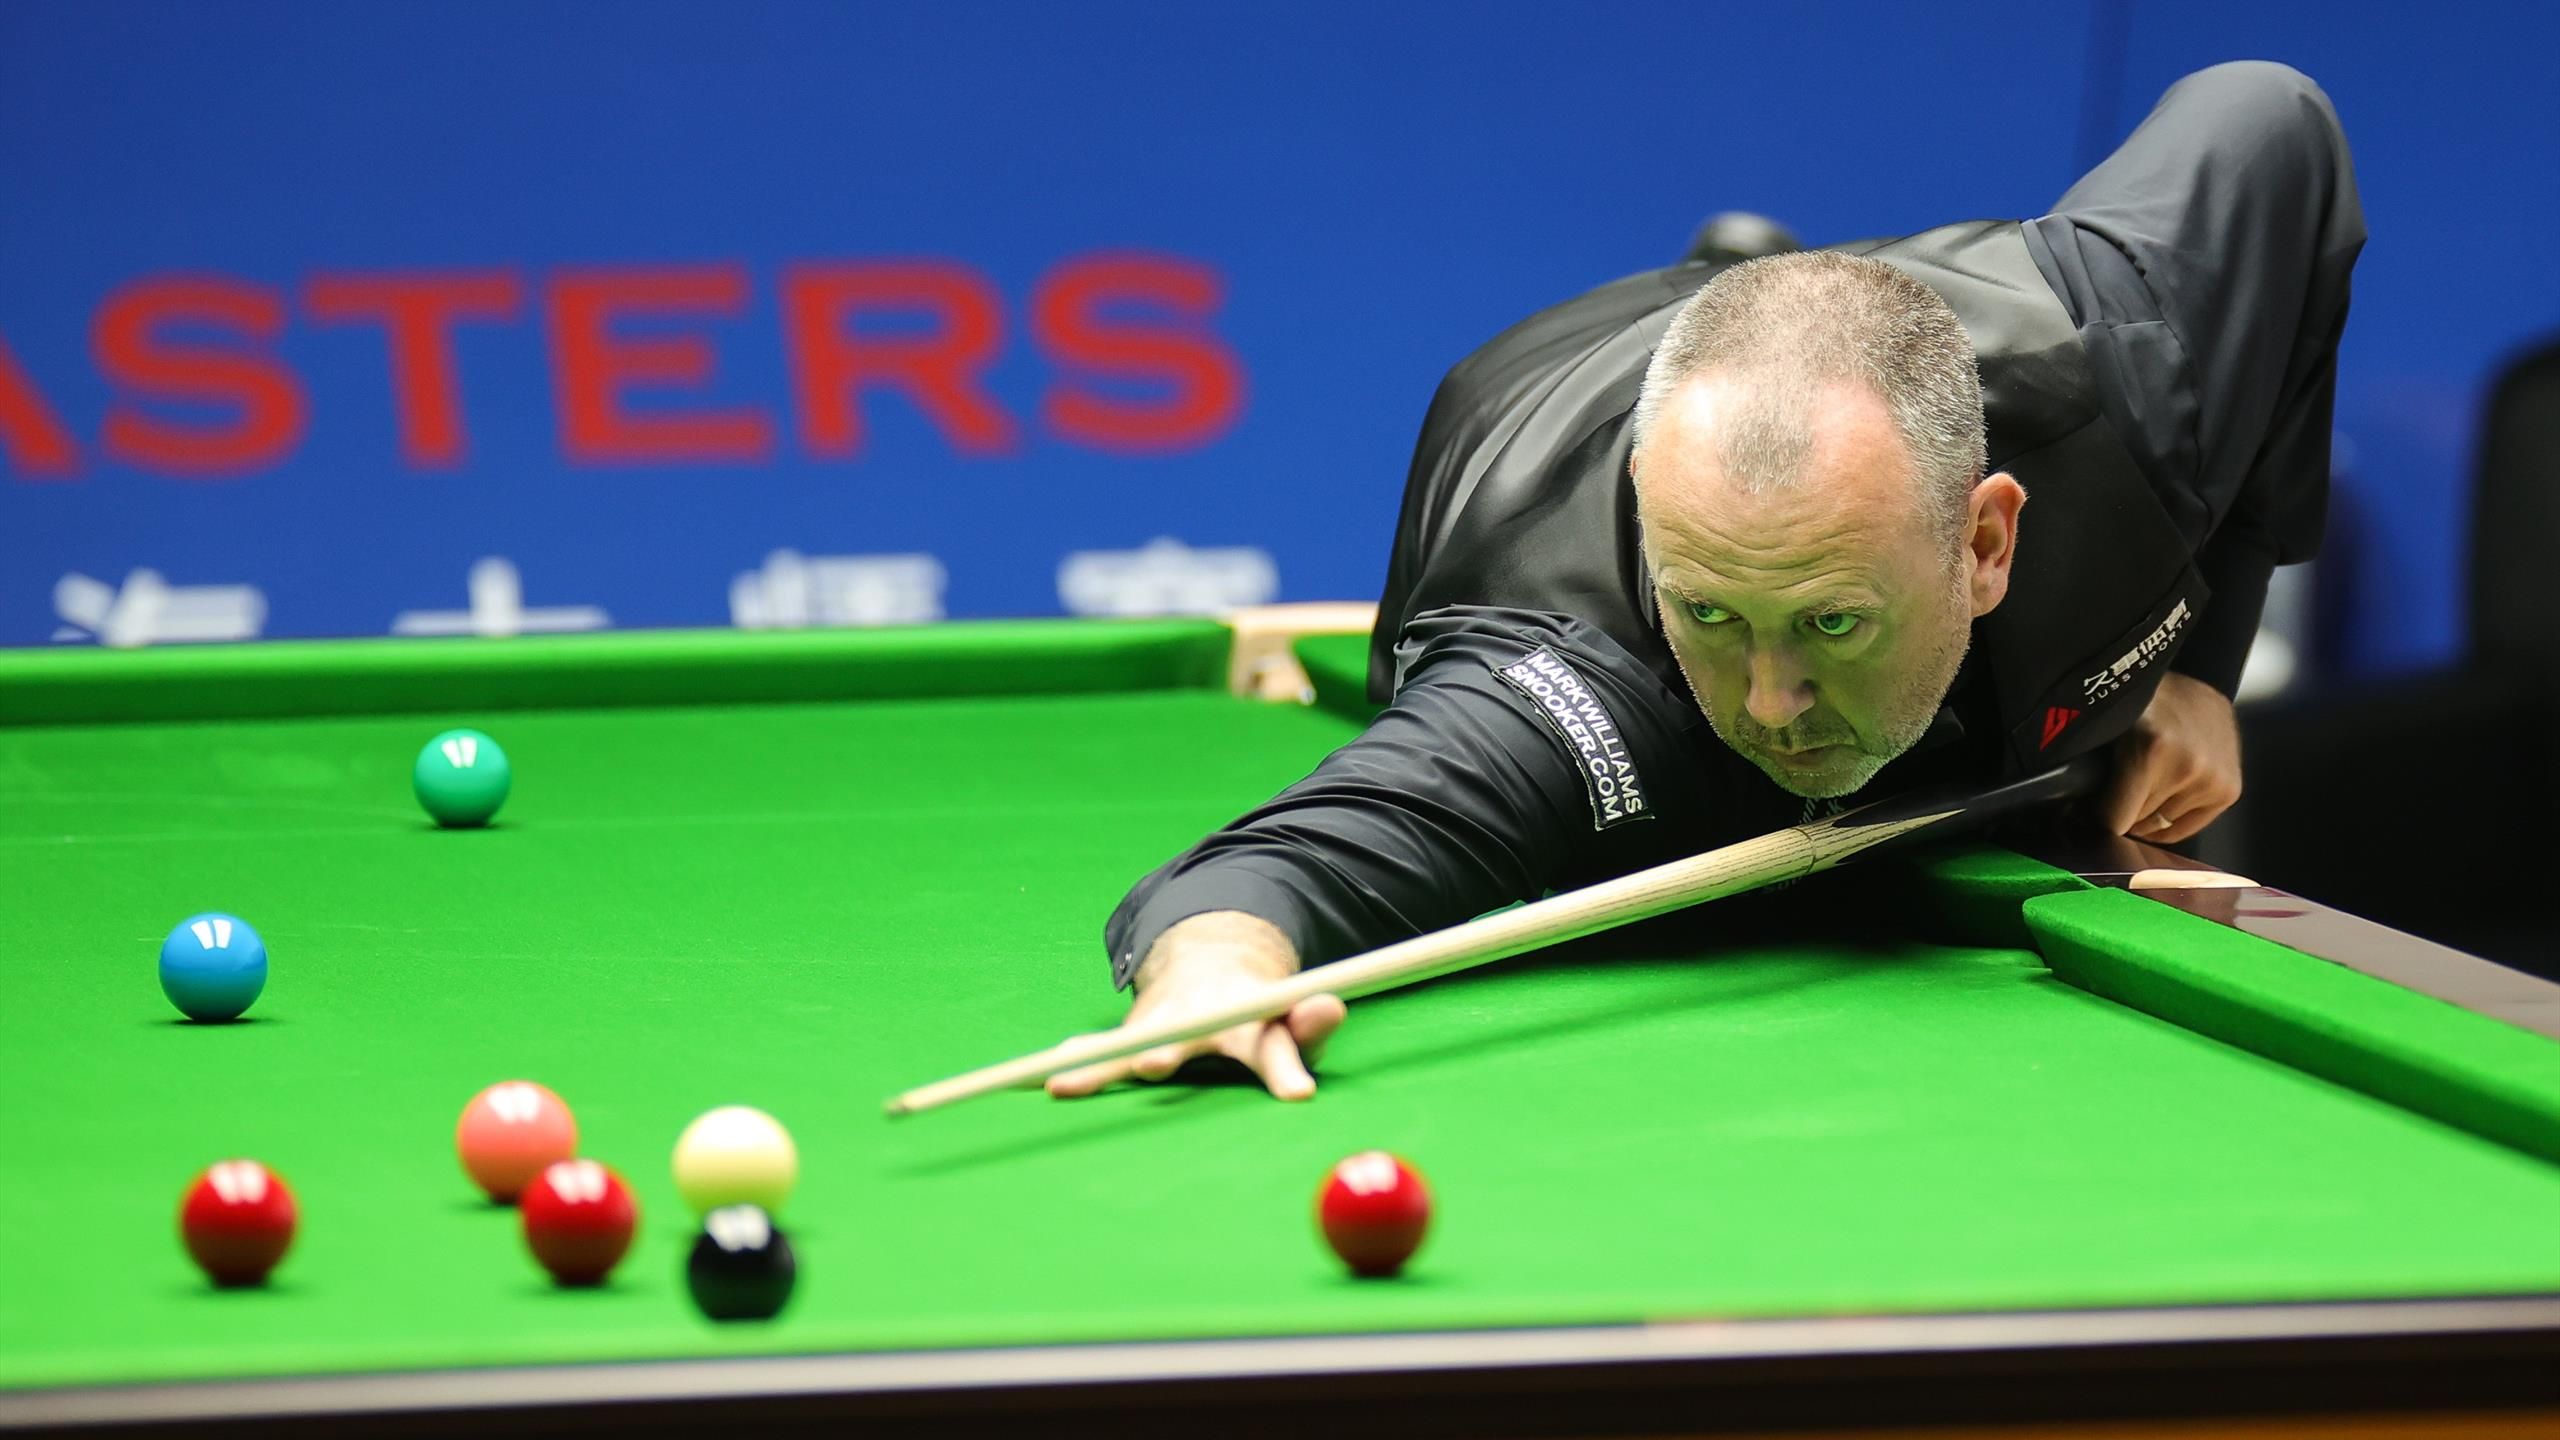 snooker results williams